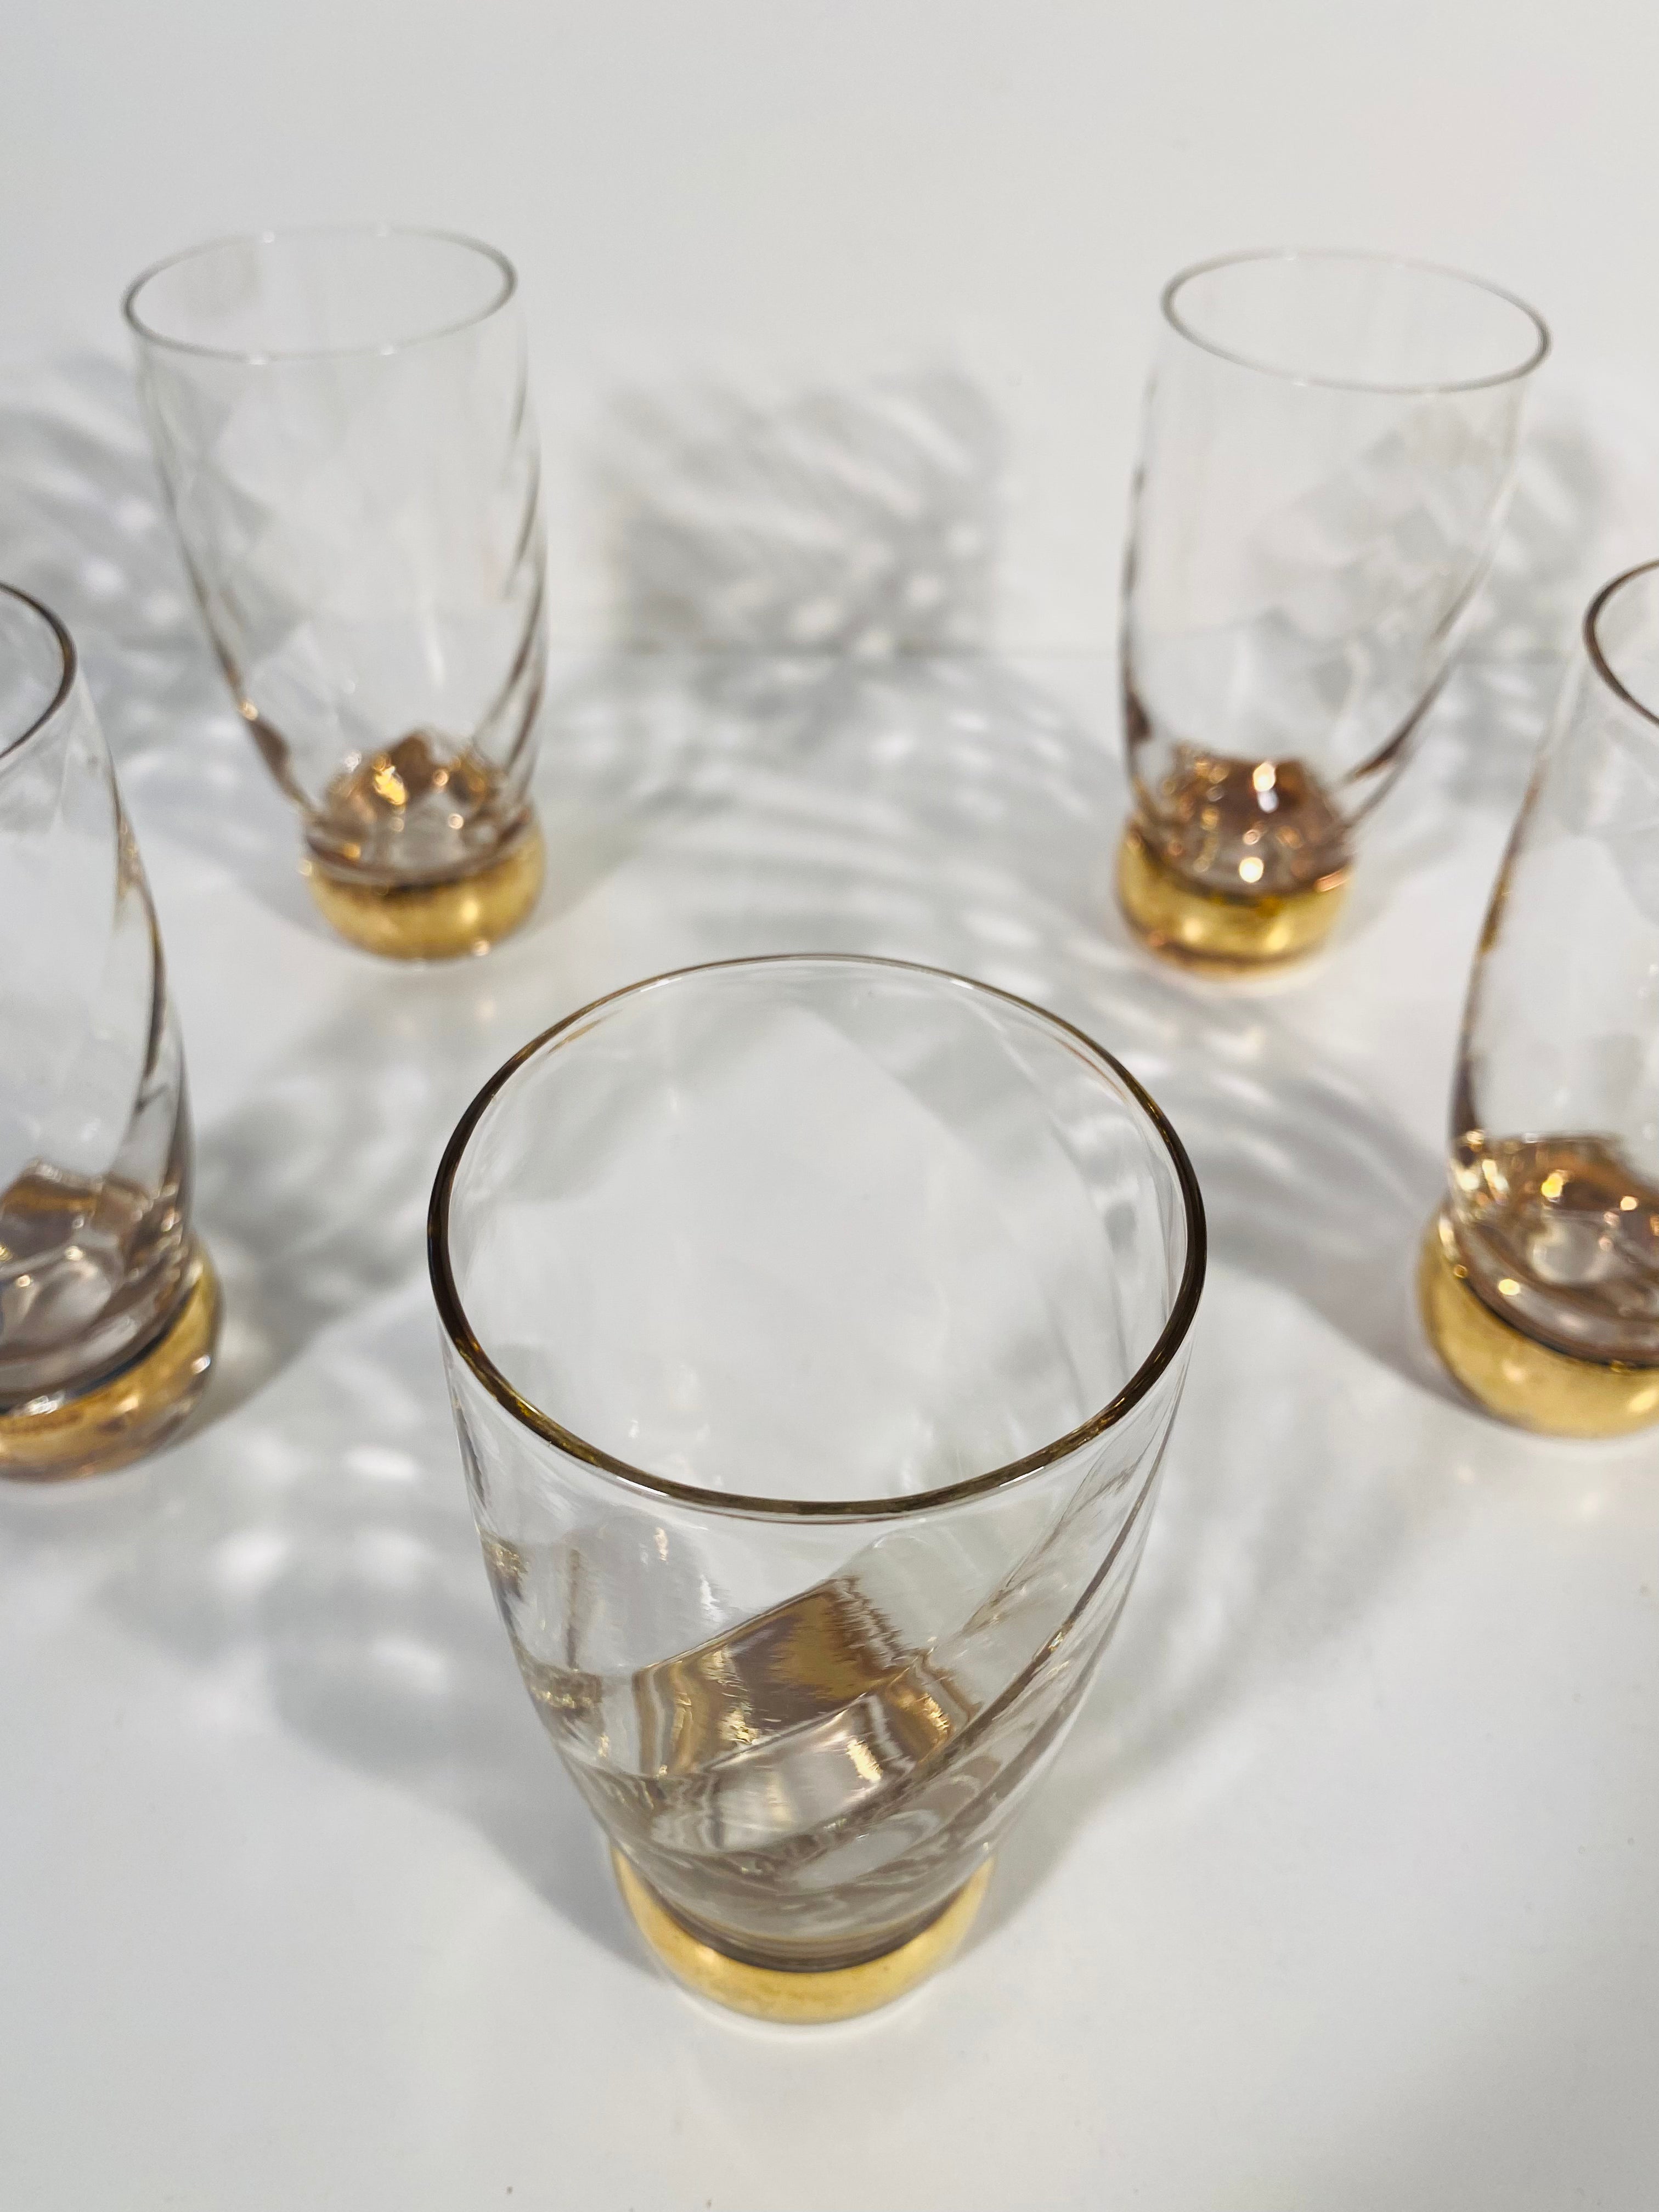 Vintage Swirl Glass Tumblers With Gold Pedestal - Set of 7